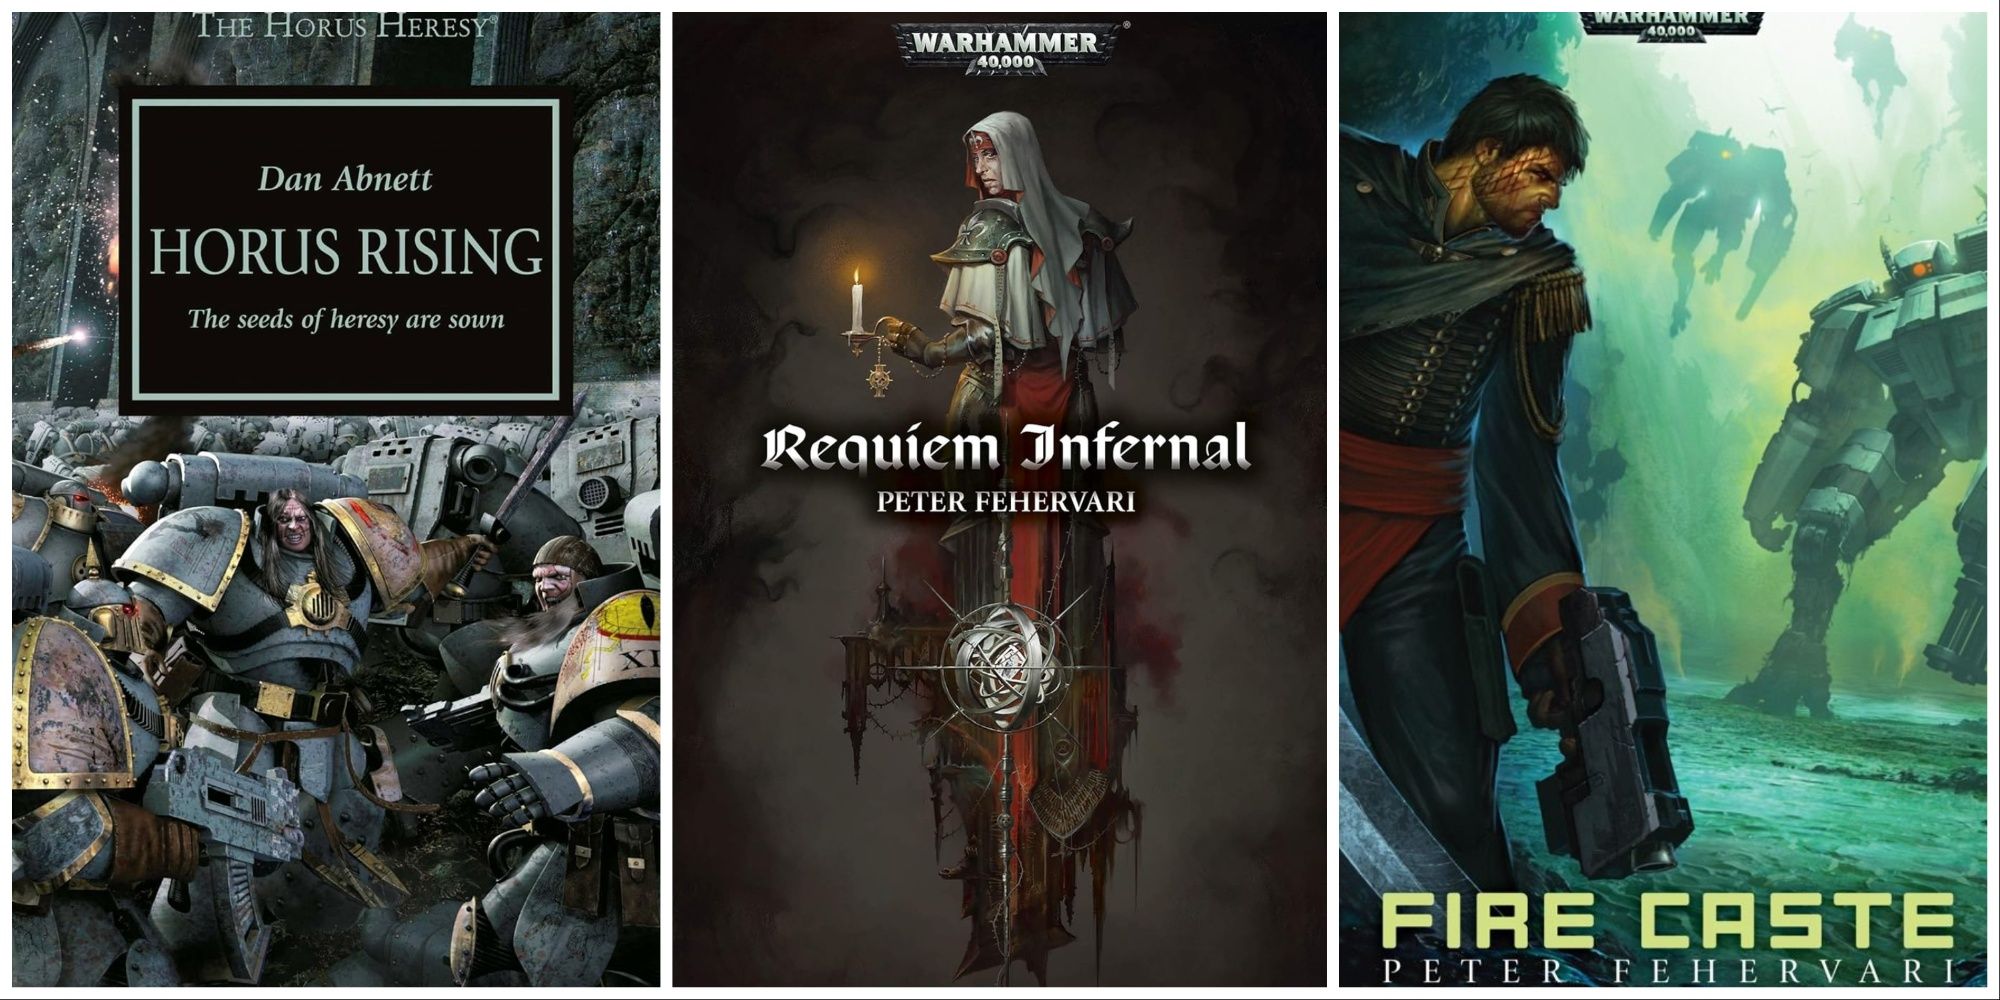 A three-part joined image of the covers of the novels Horus Rising, Requiem Infernal, and Fire Caste.